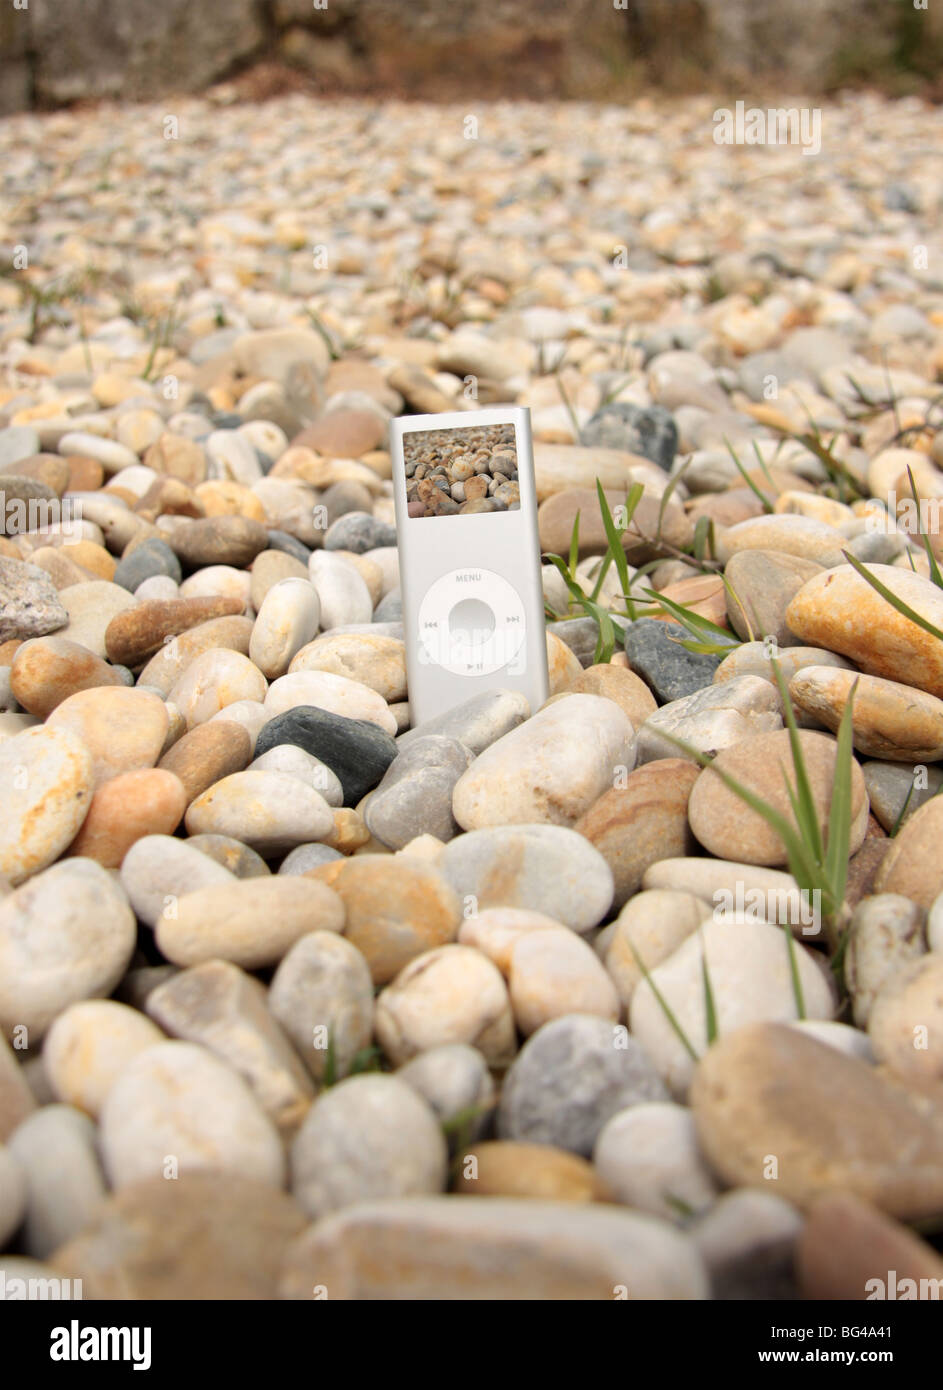 Mp3 (Ipod stile) player graved in the ground with rocks around him Stock Photo